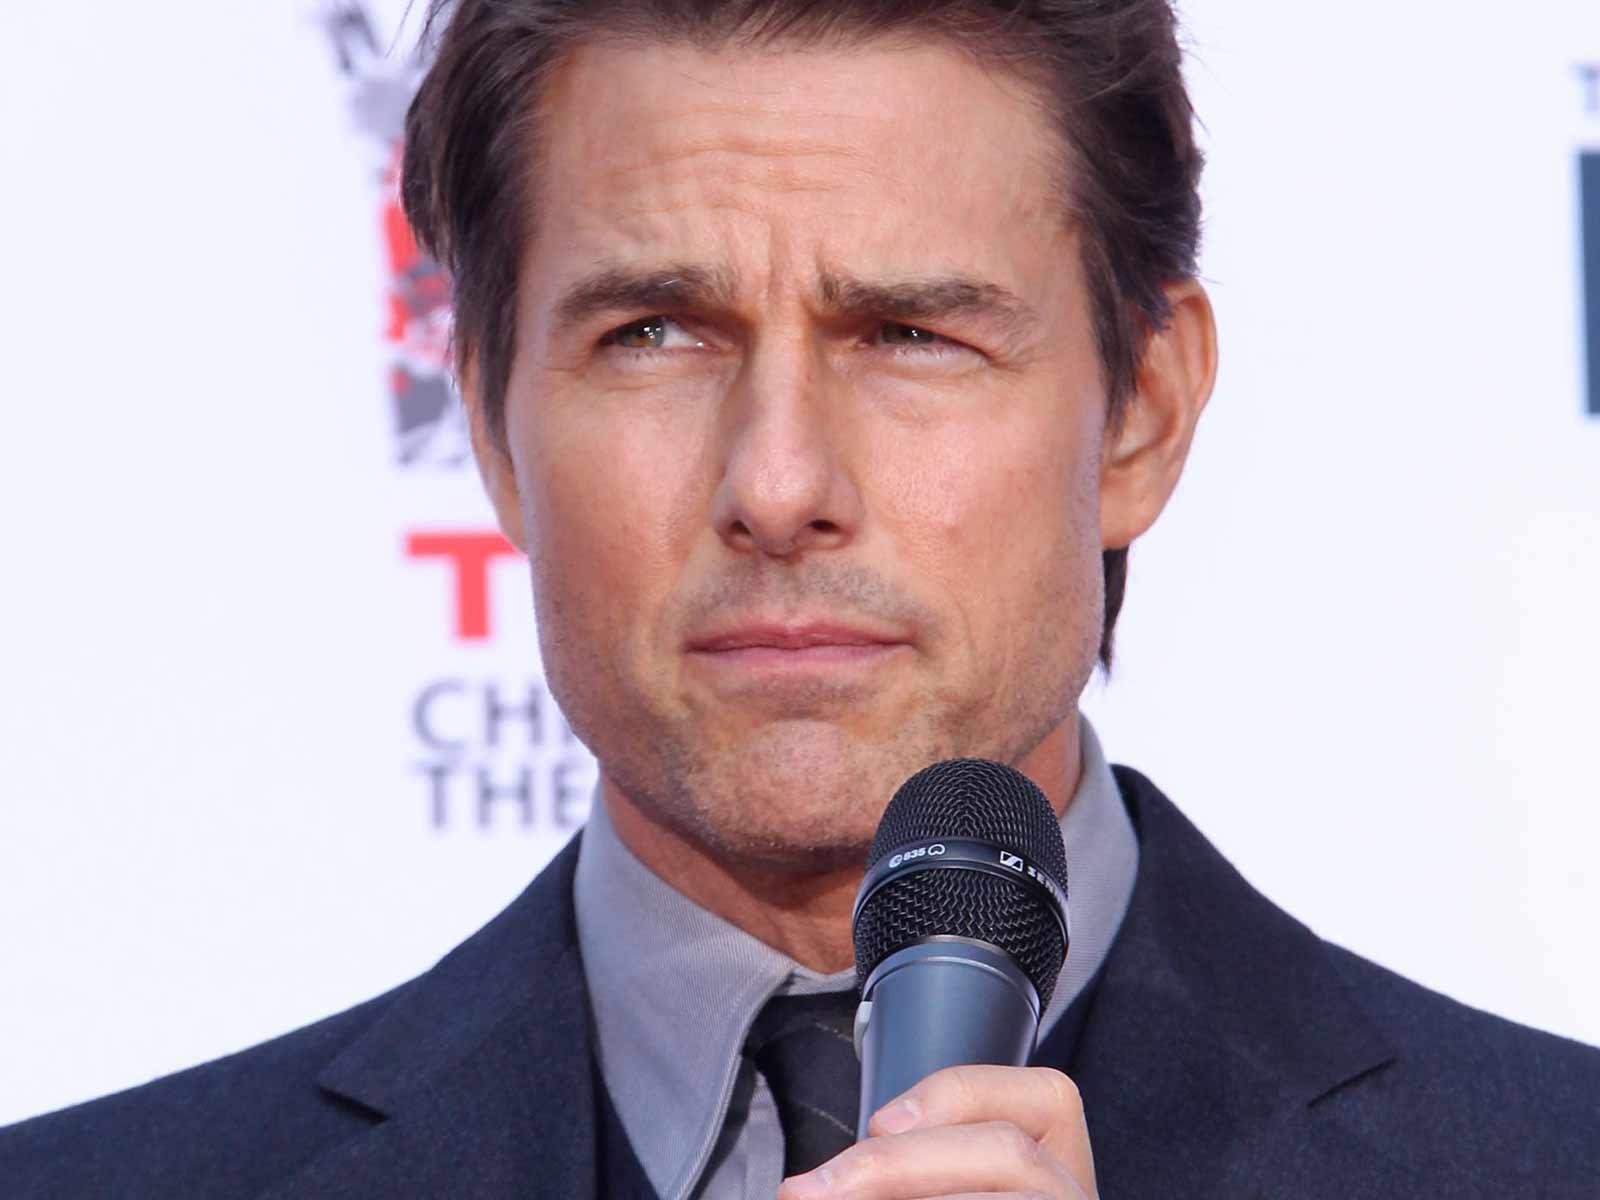 Tom Cruise Partially Blamed for Plane Crash That Killed Two People on Film Set